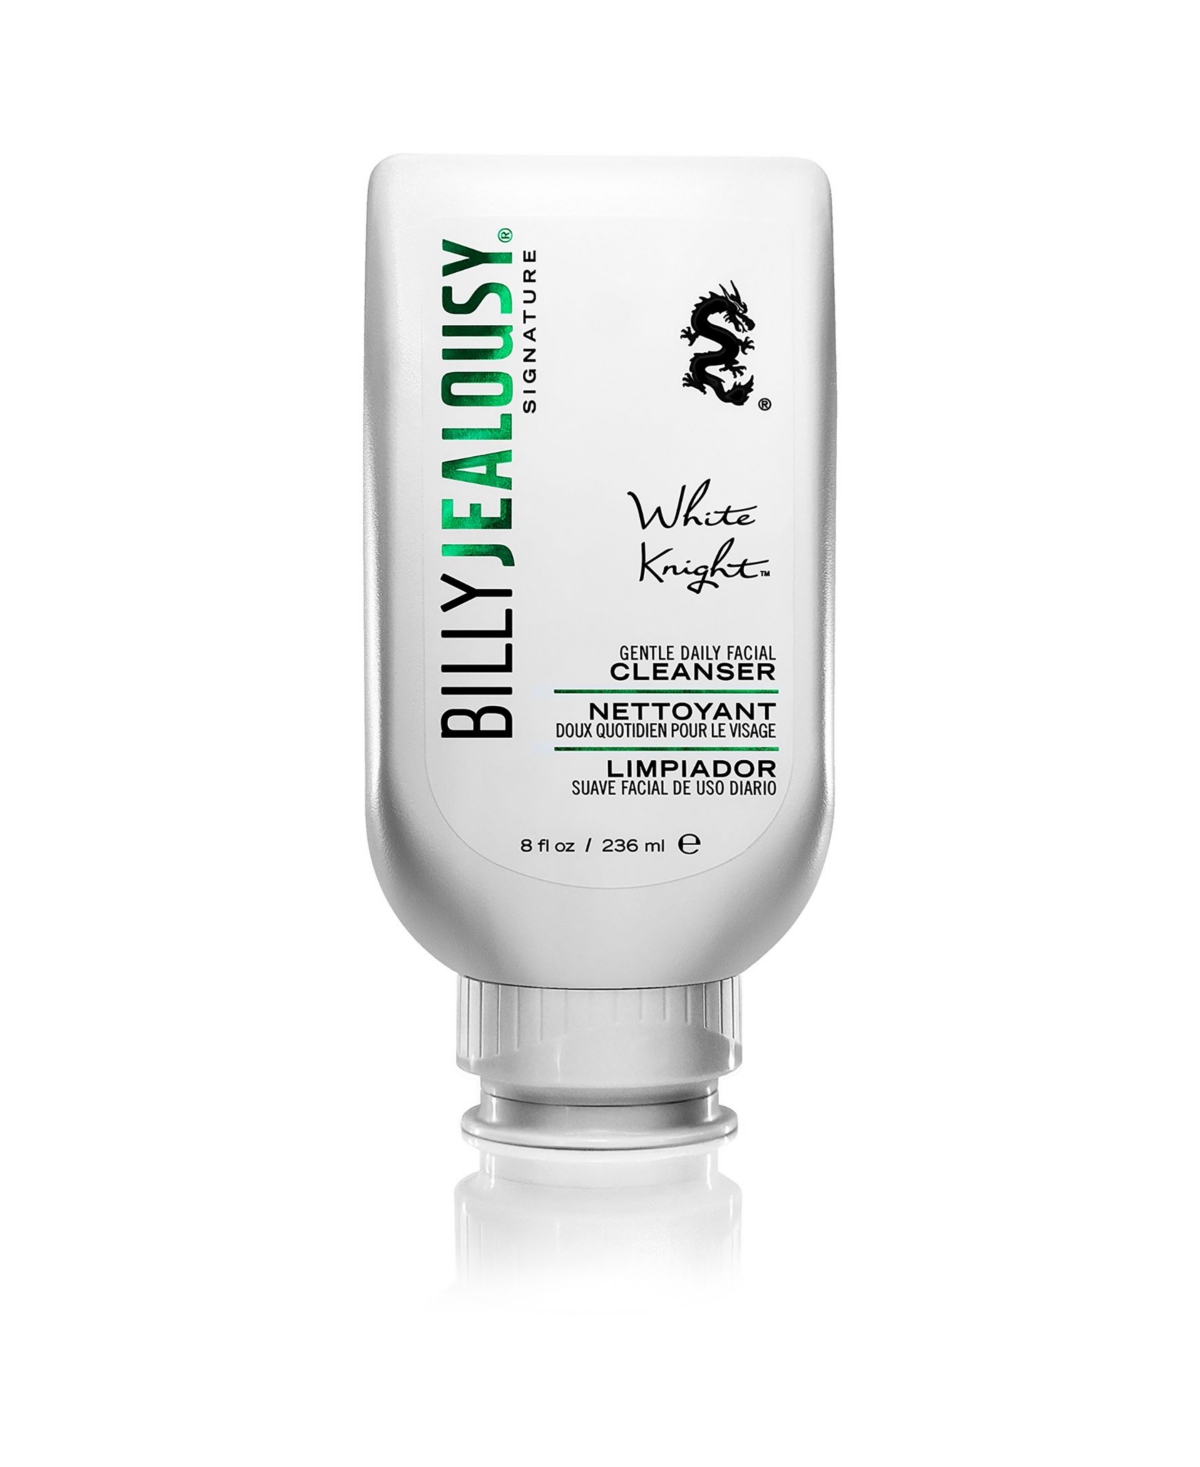 White Knight Daily Facial Cleanser, 8 oz.